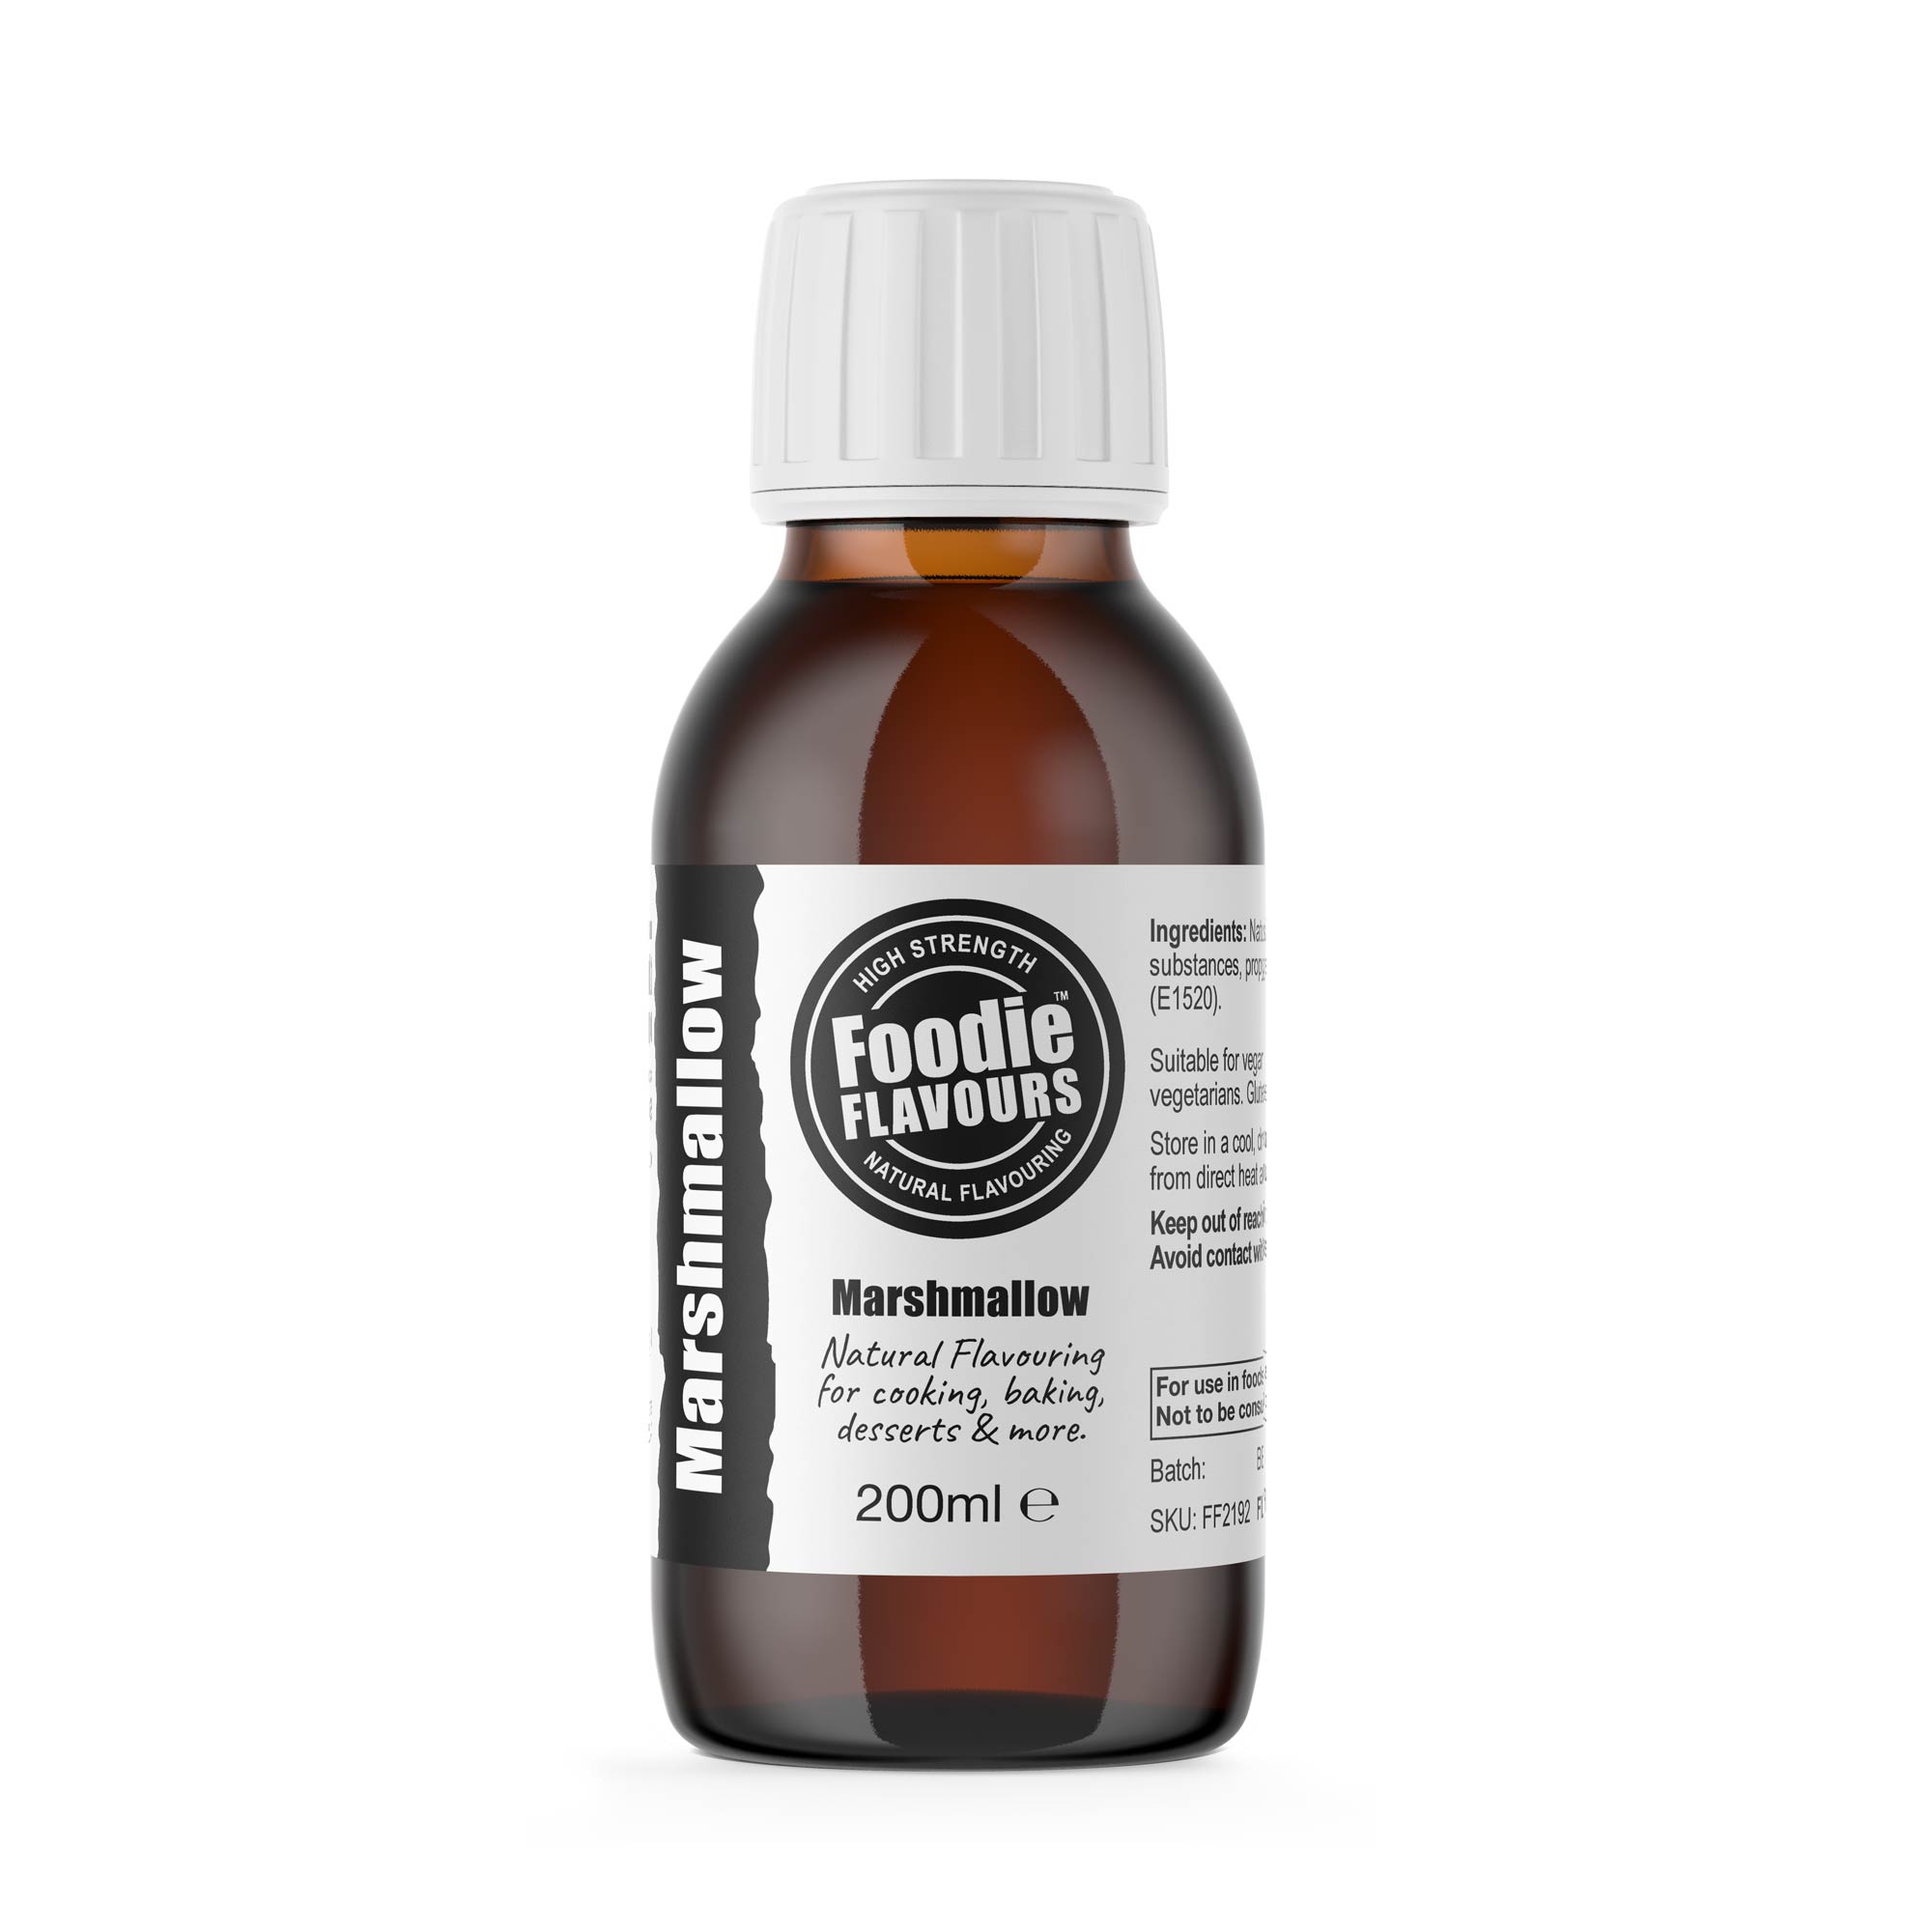 Marshmallow Natural Flavouring 200ml - Foodie Flavours